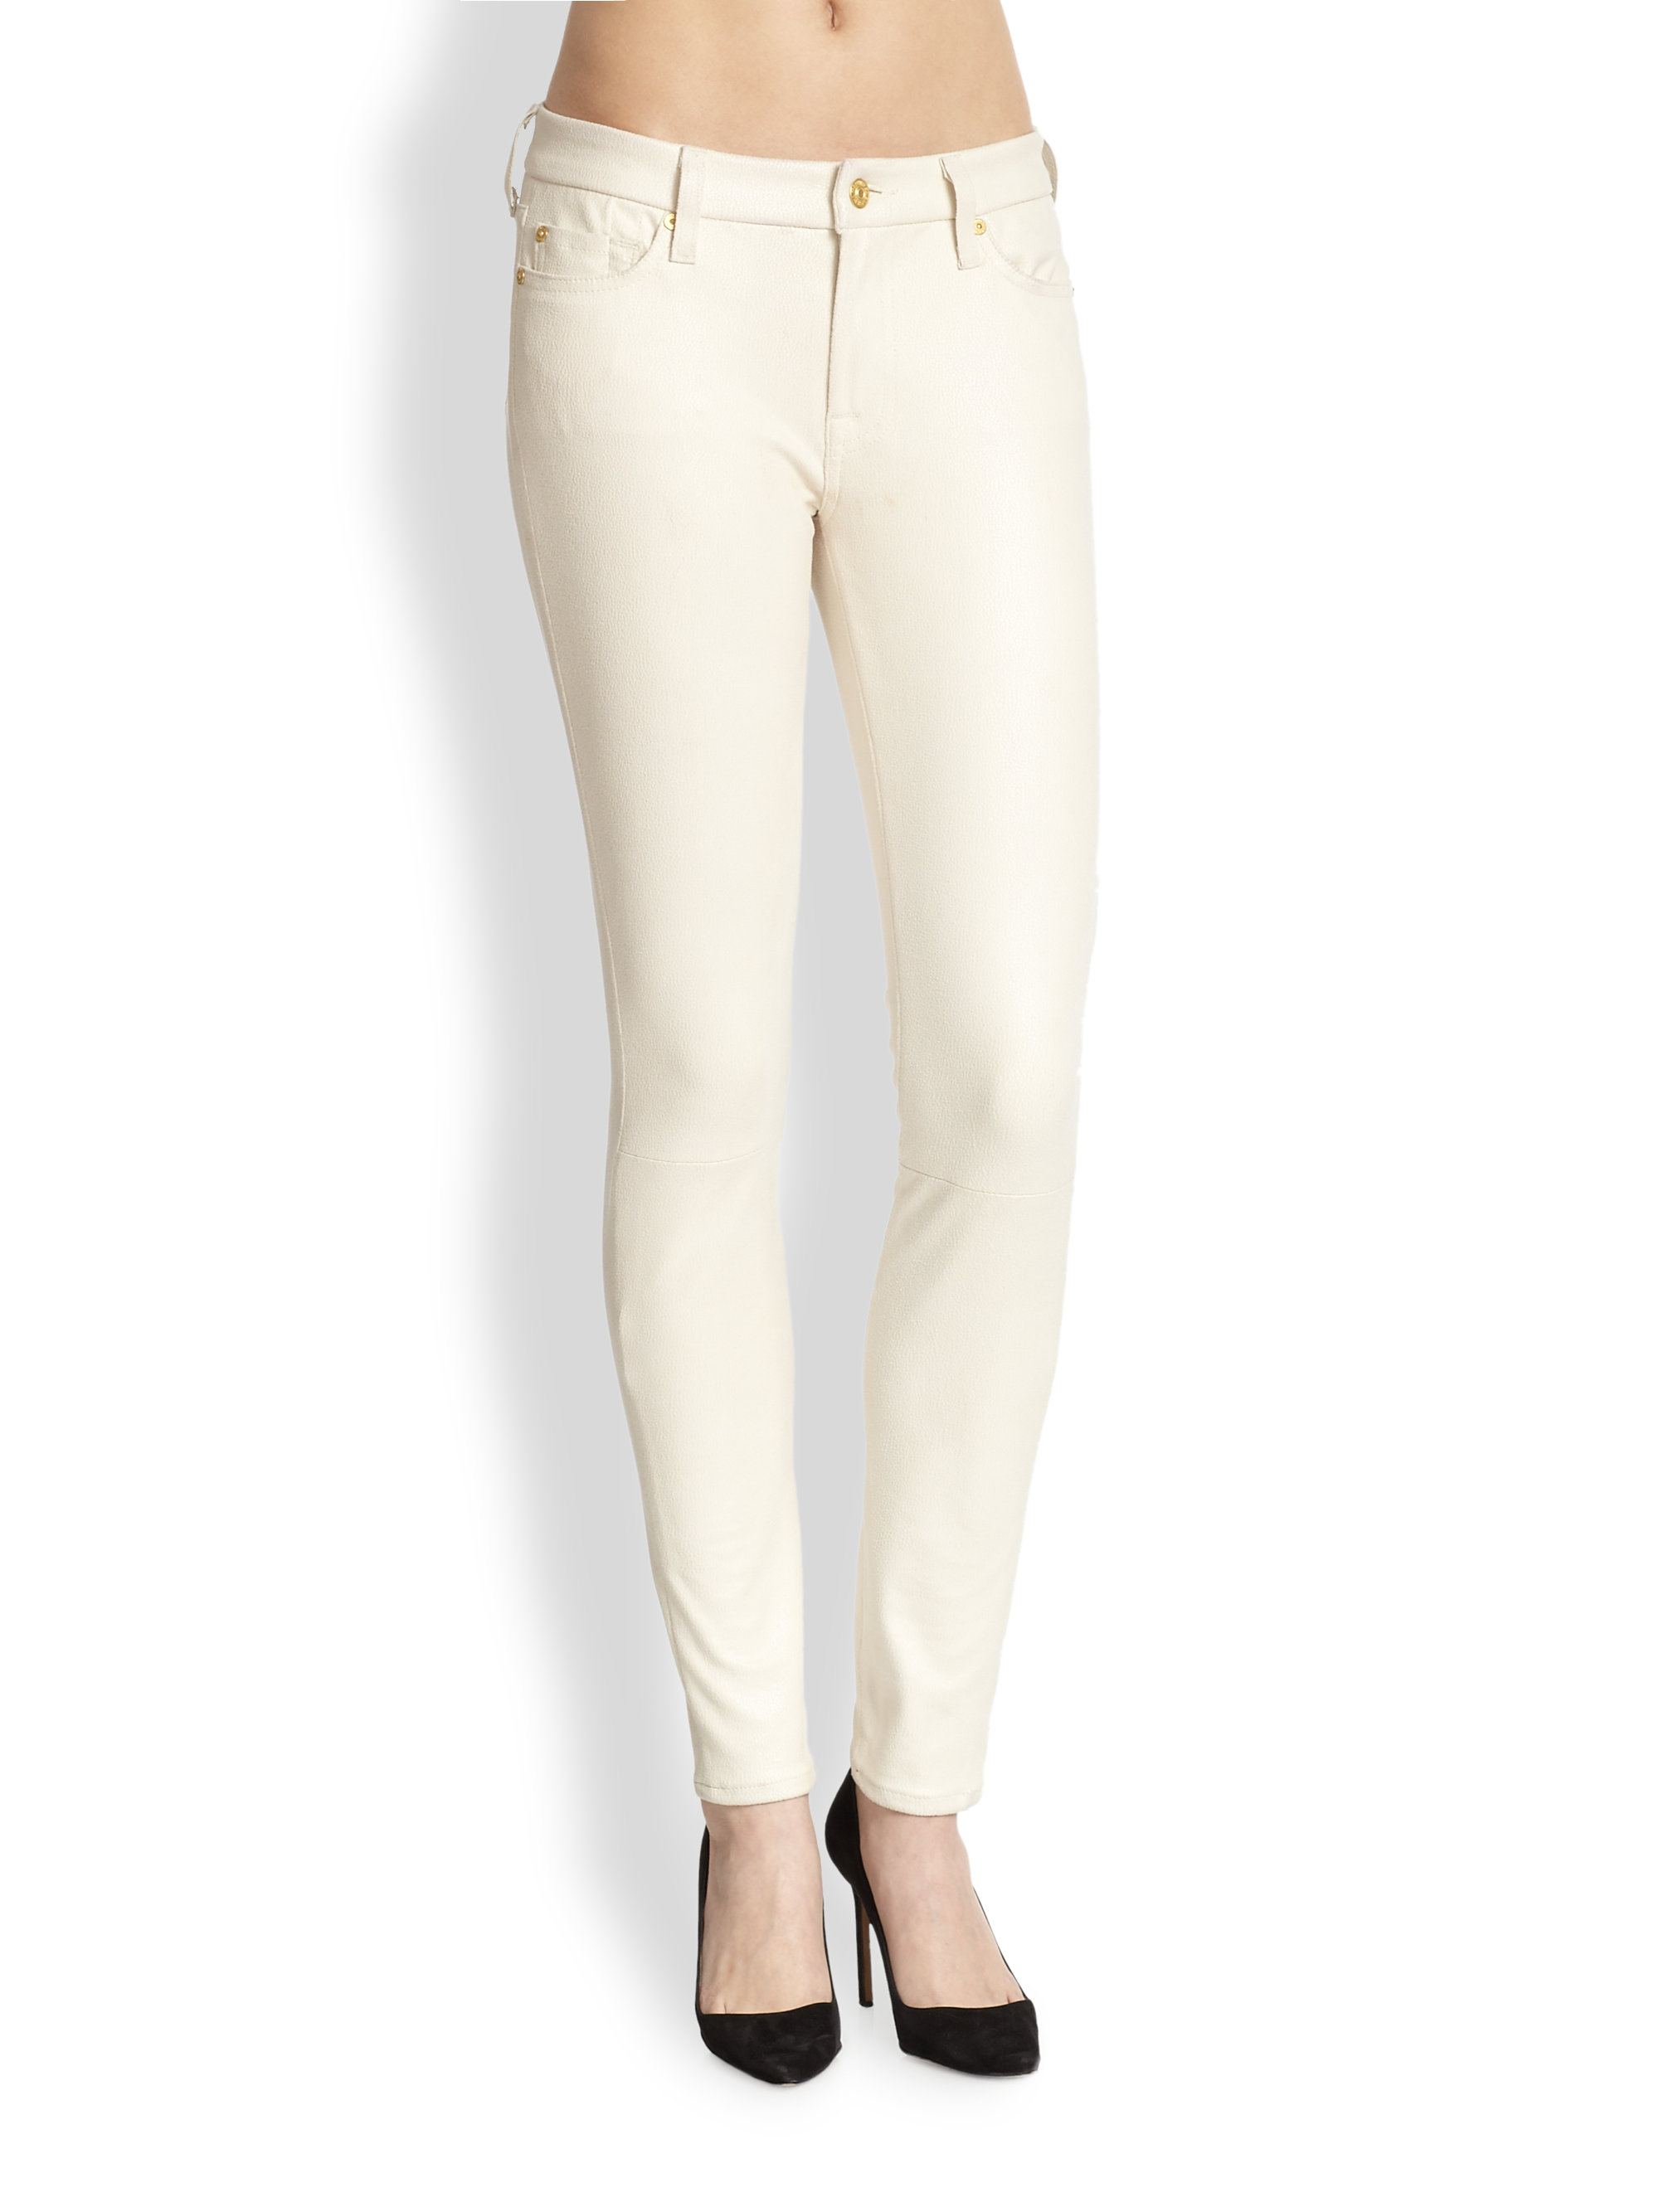 Lyst - 7 For All Mankind Crackle Leather-Like Skinny Jeans in Natural